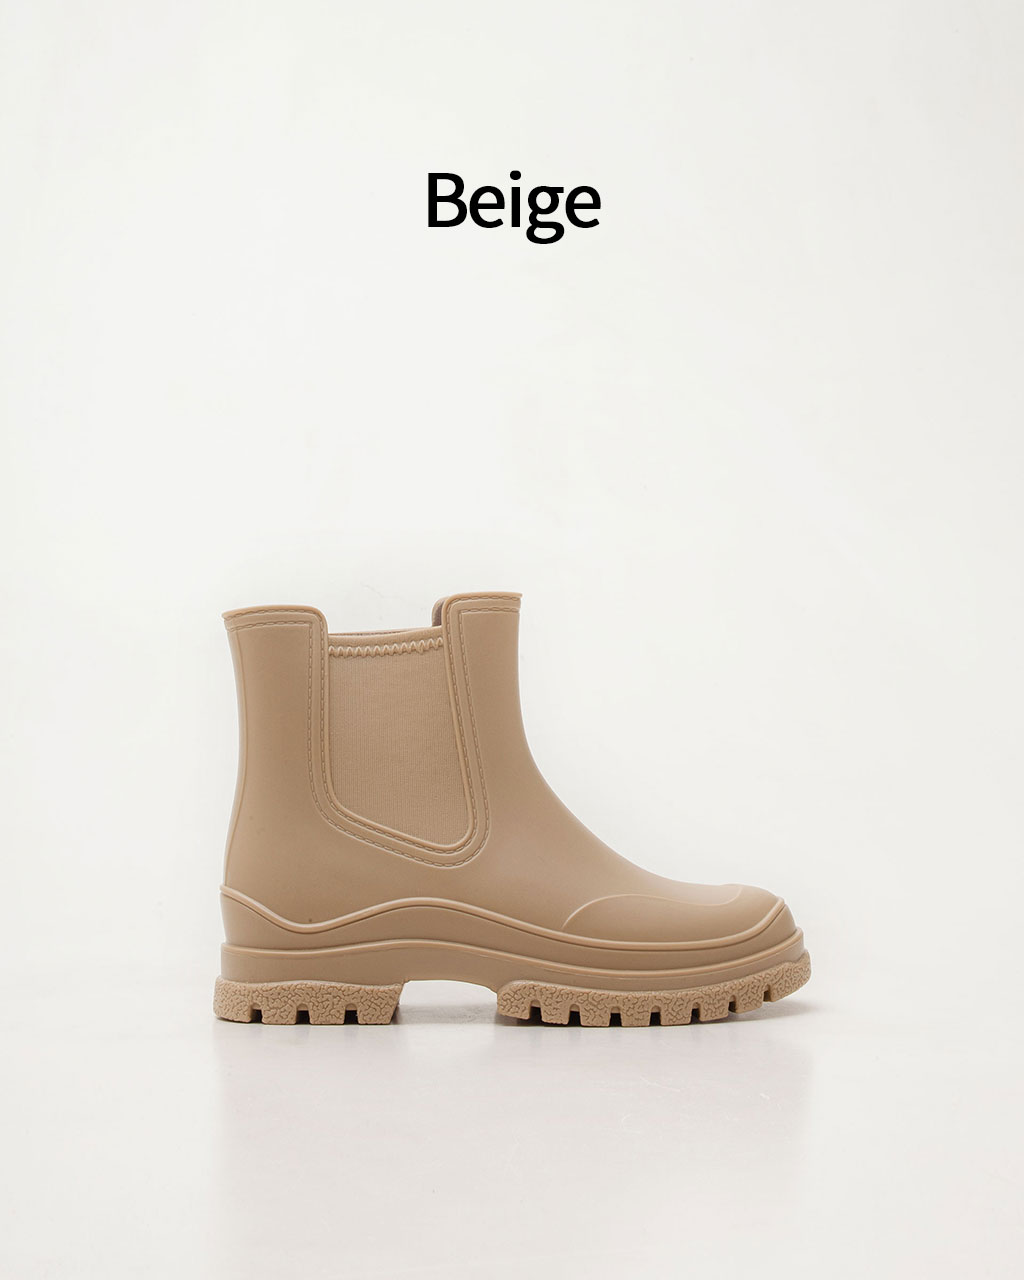 Drizzle-23 - Beige()